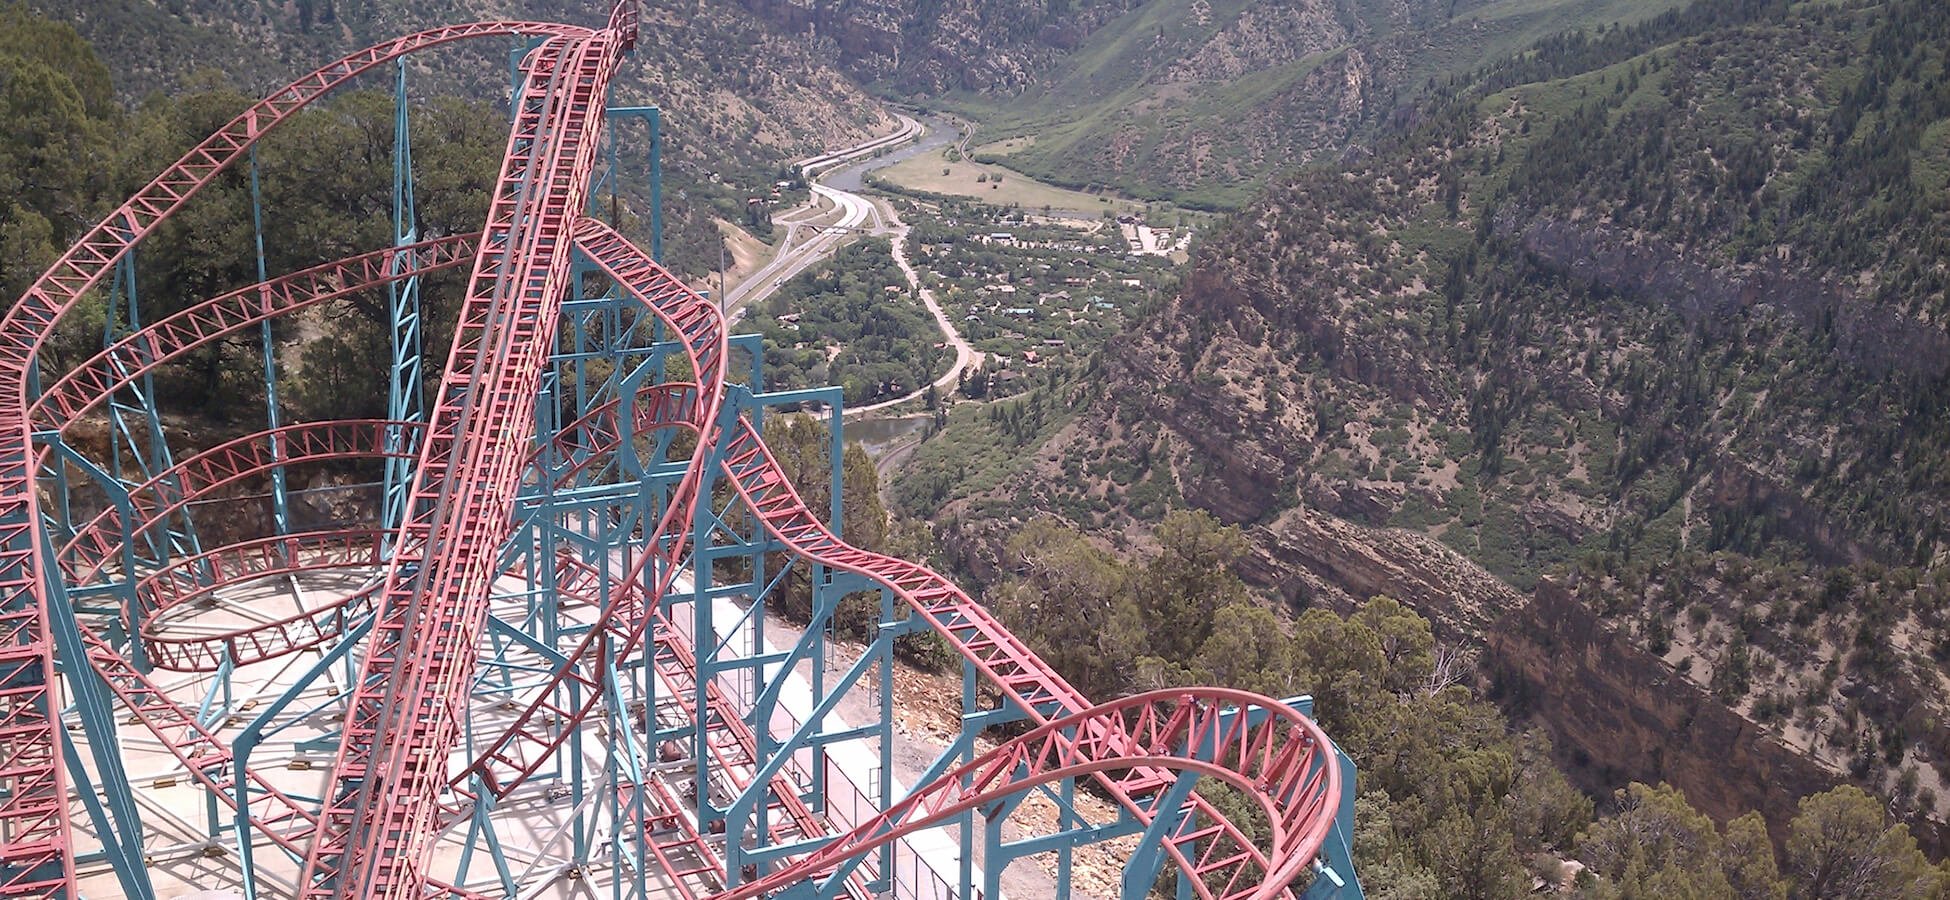 best themed roller coasters of the decade, our top 14